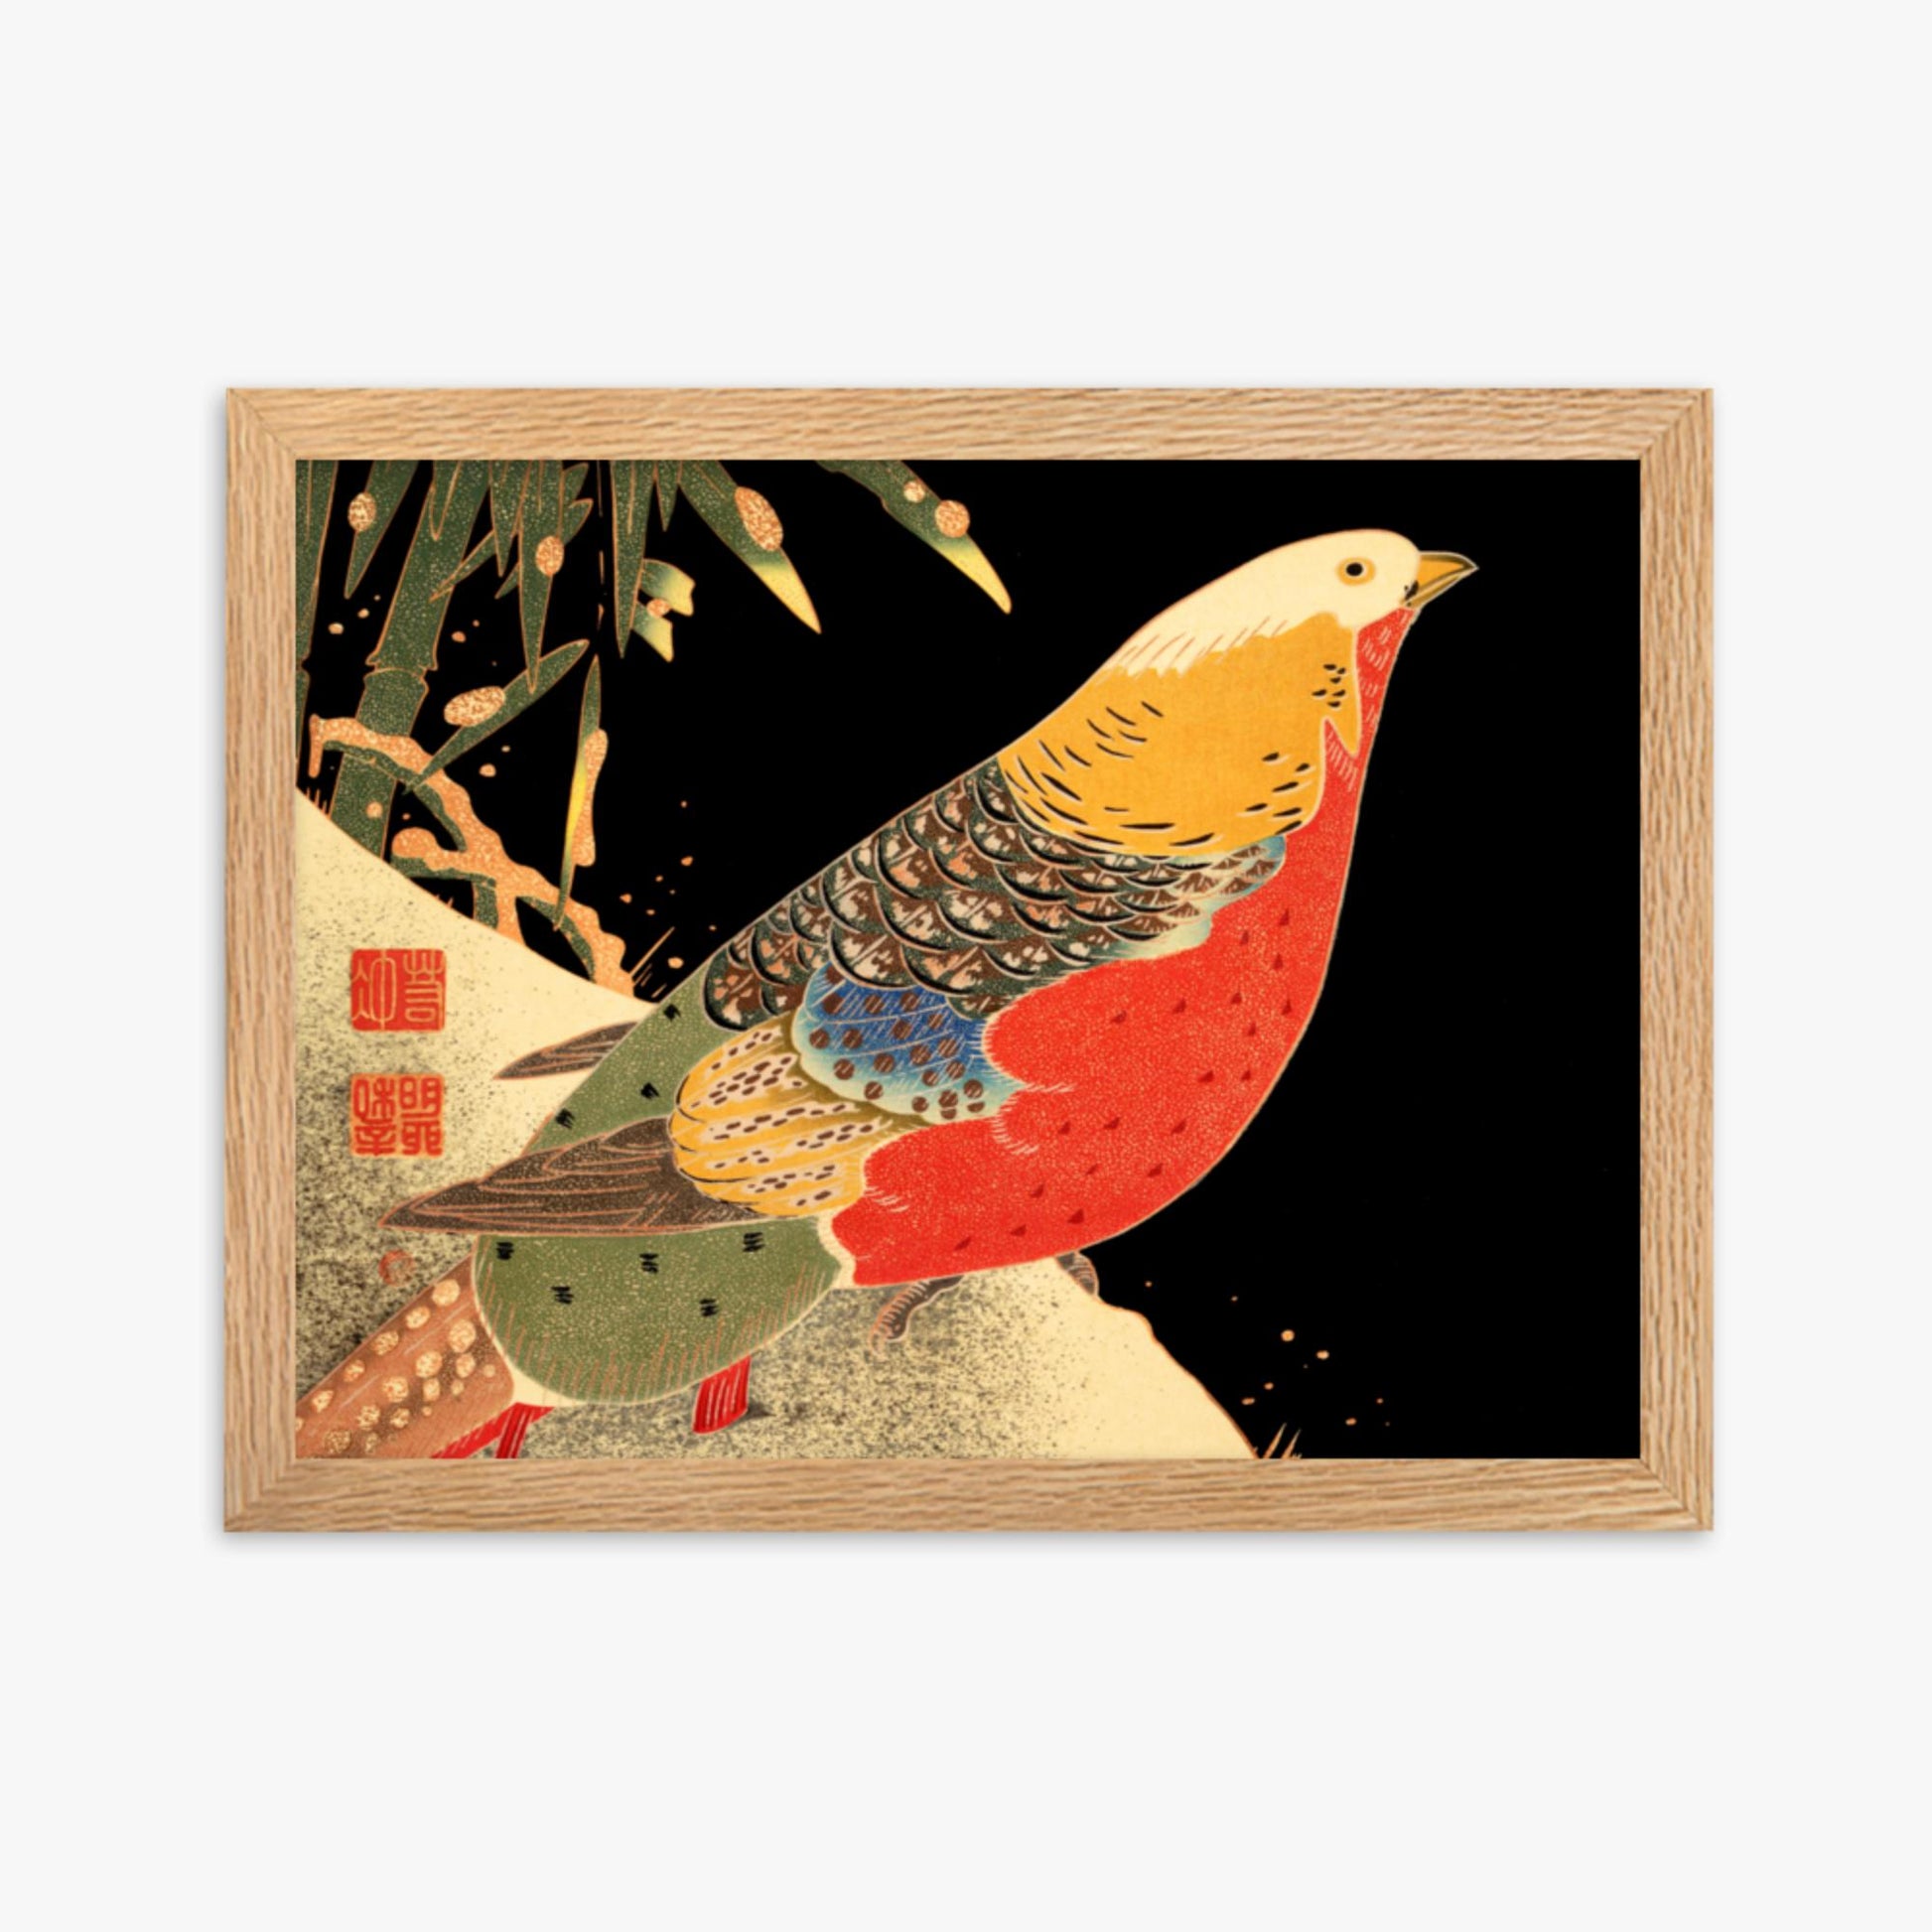 Ito Jakuchu - Golden Pheasant in the Snow 30x40 cm Poster With Oak Frame